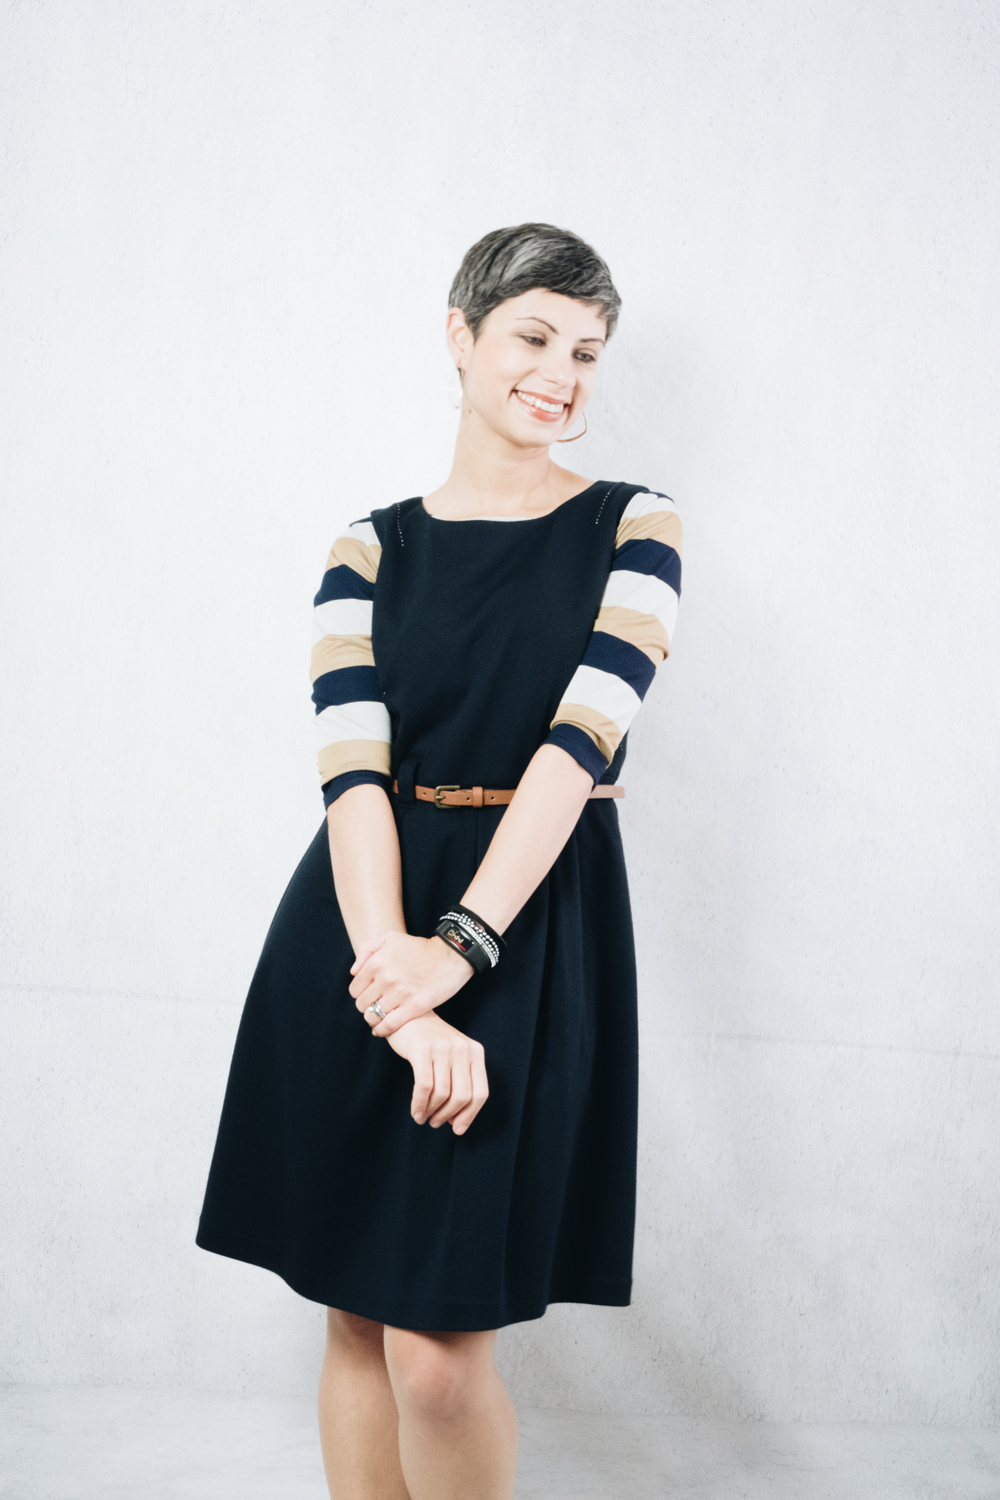 Navy pinafore in jersey worn with a DIY striped navy, beige and gold top, pointy navy flats and hoop earrings.
Dressmaking | OOTD | Styling 